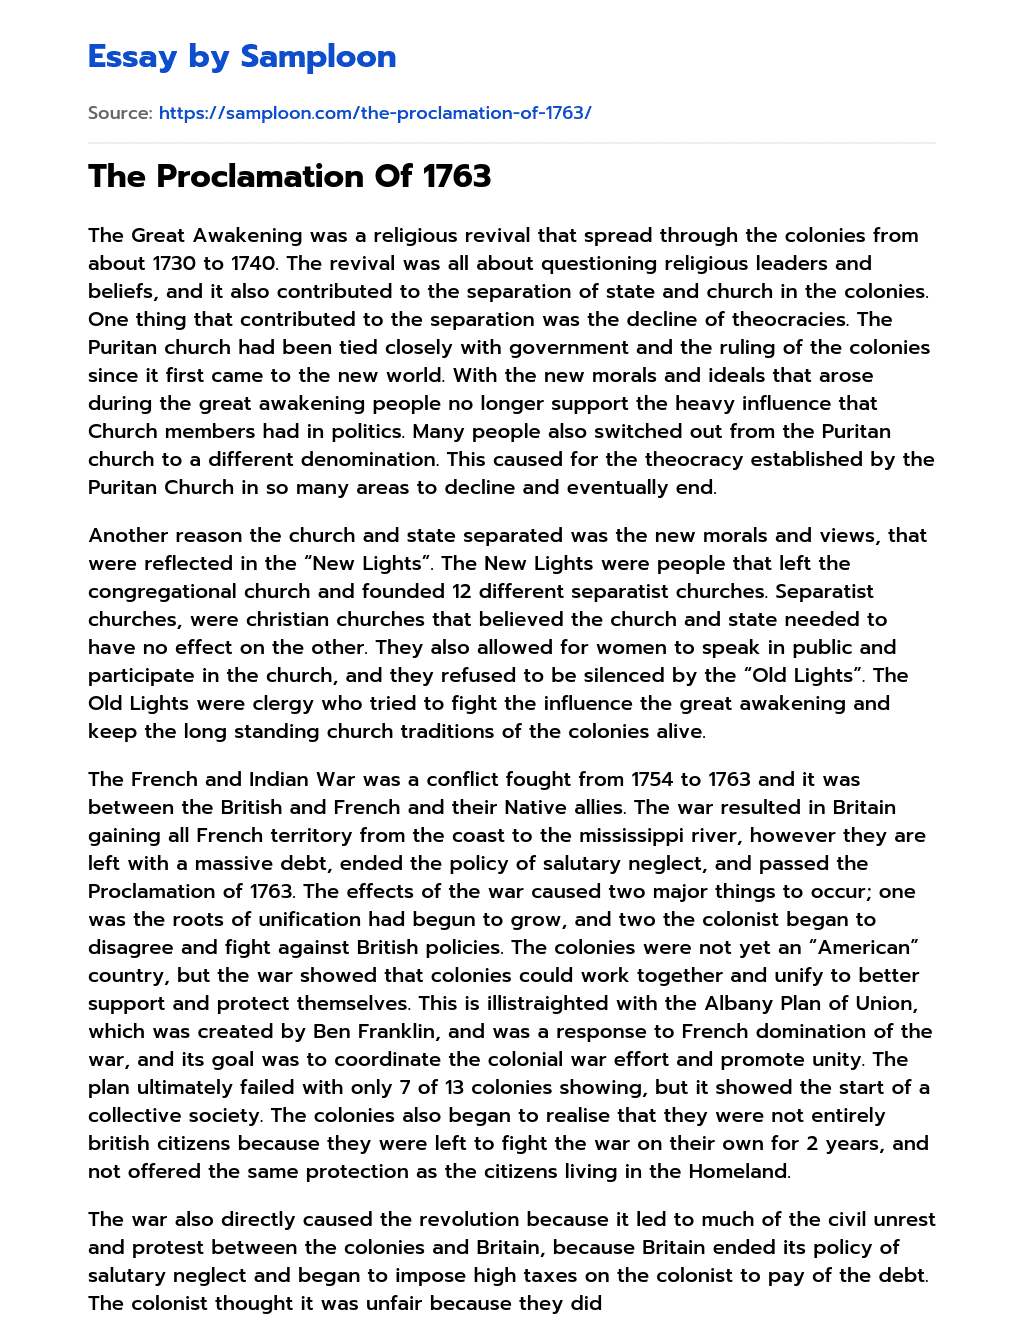 The Proclamation Of 1763 essay